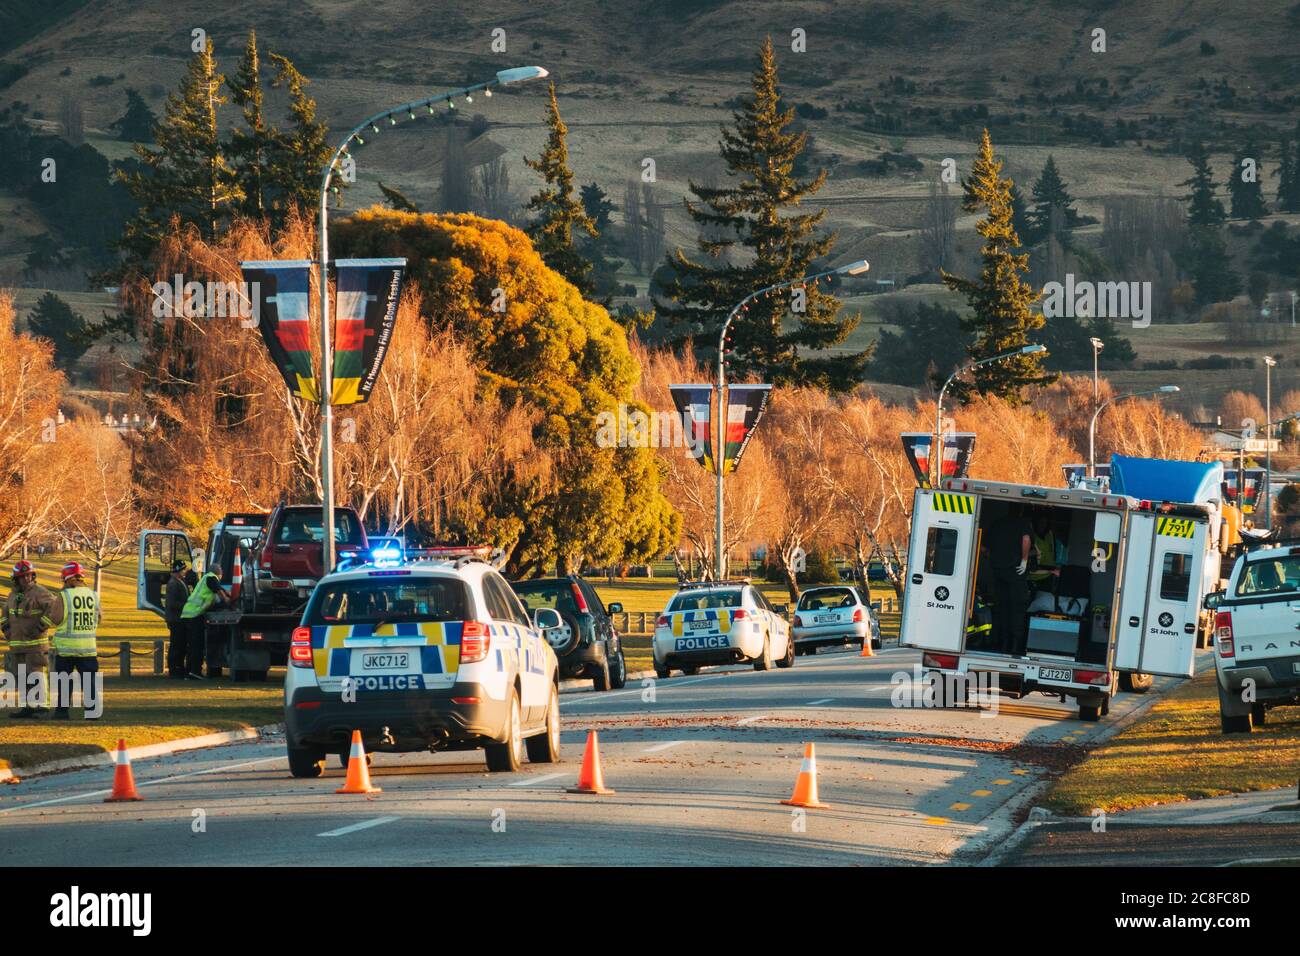 Emergency services attend the scene of a car crash in the middle of Wanaka township, New Zealand Stock Photo